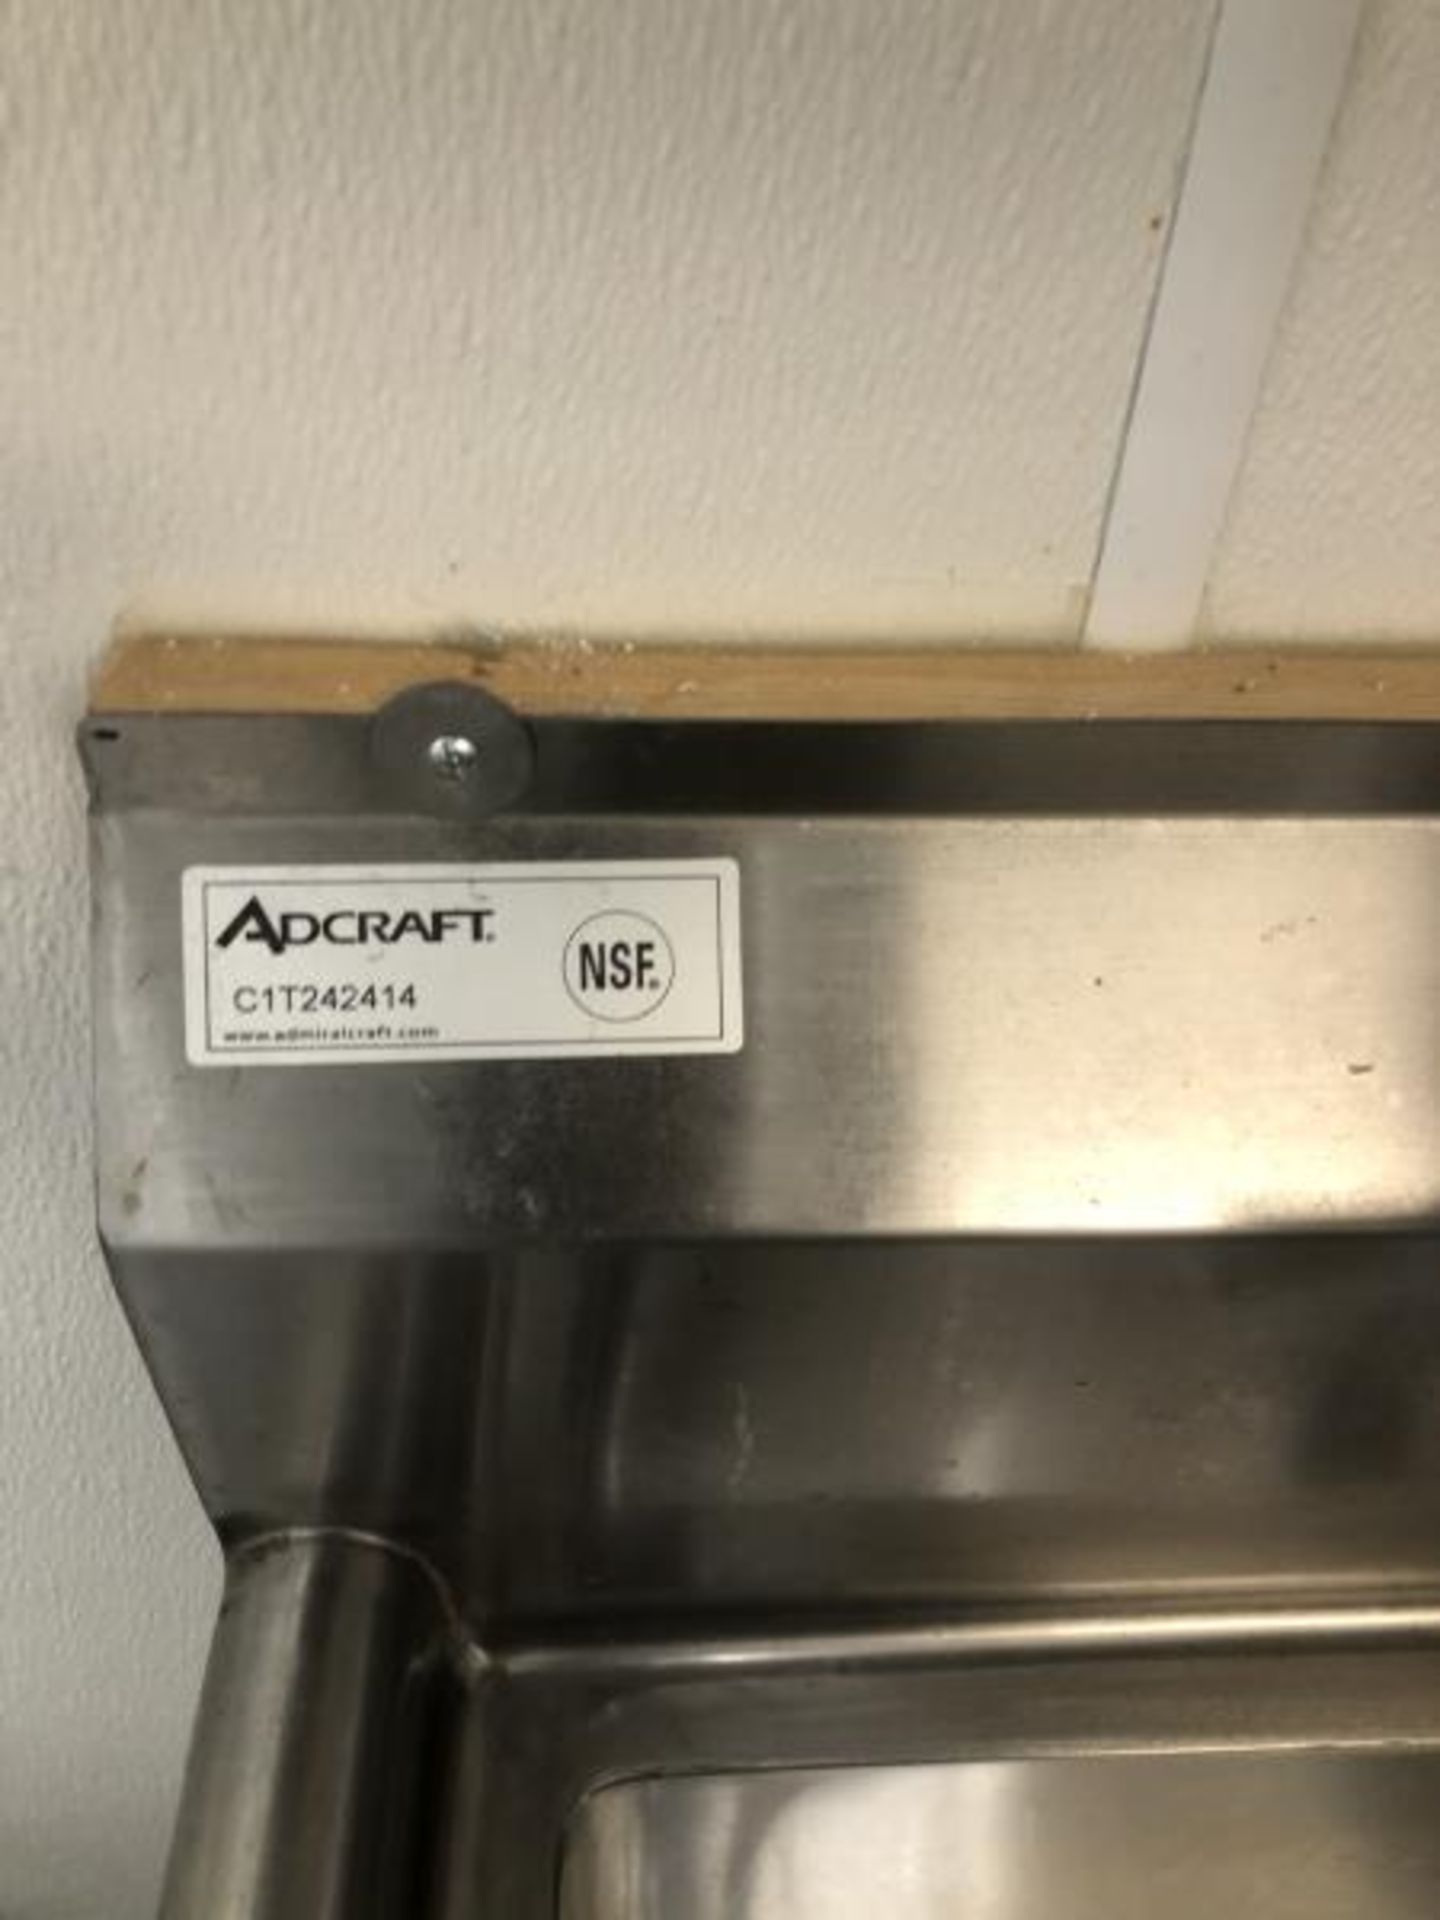 Adcraft 1 Compartment Sink CIT242414 - Image 2 of 2